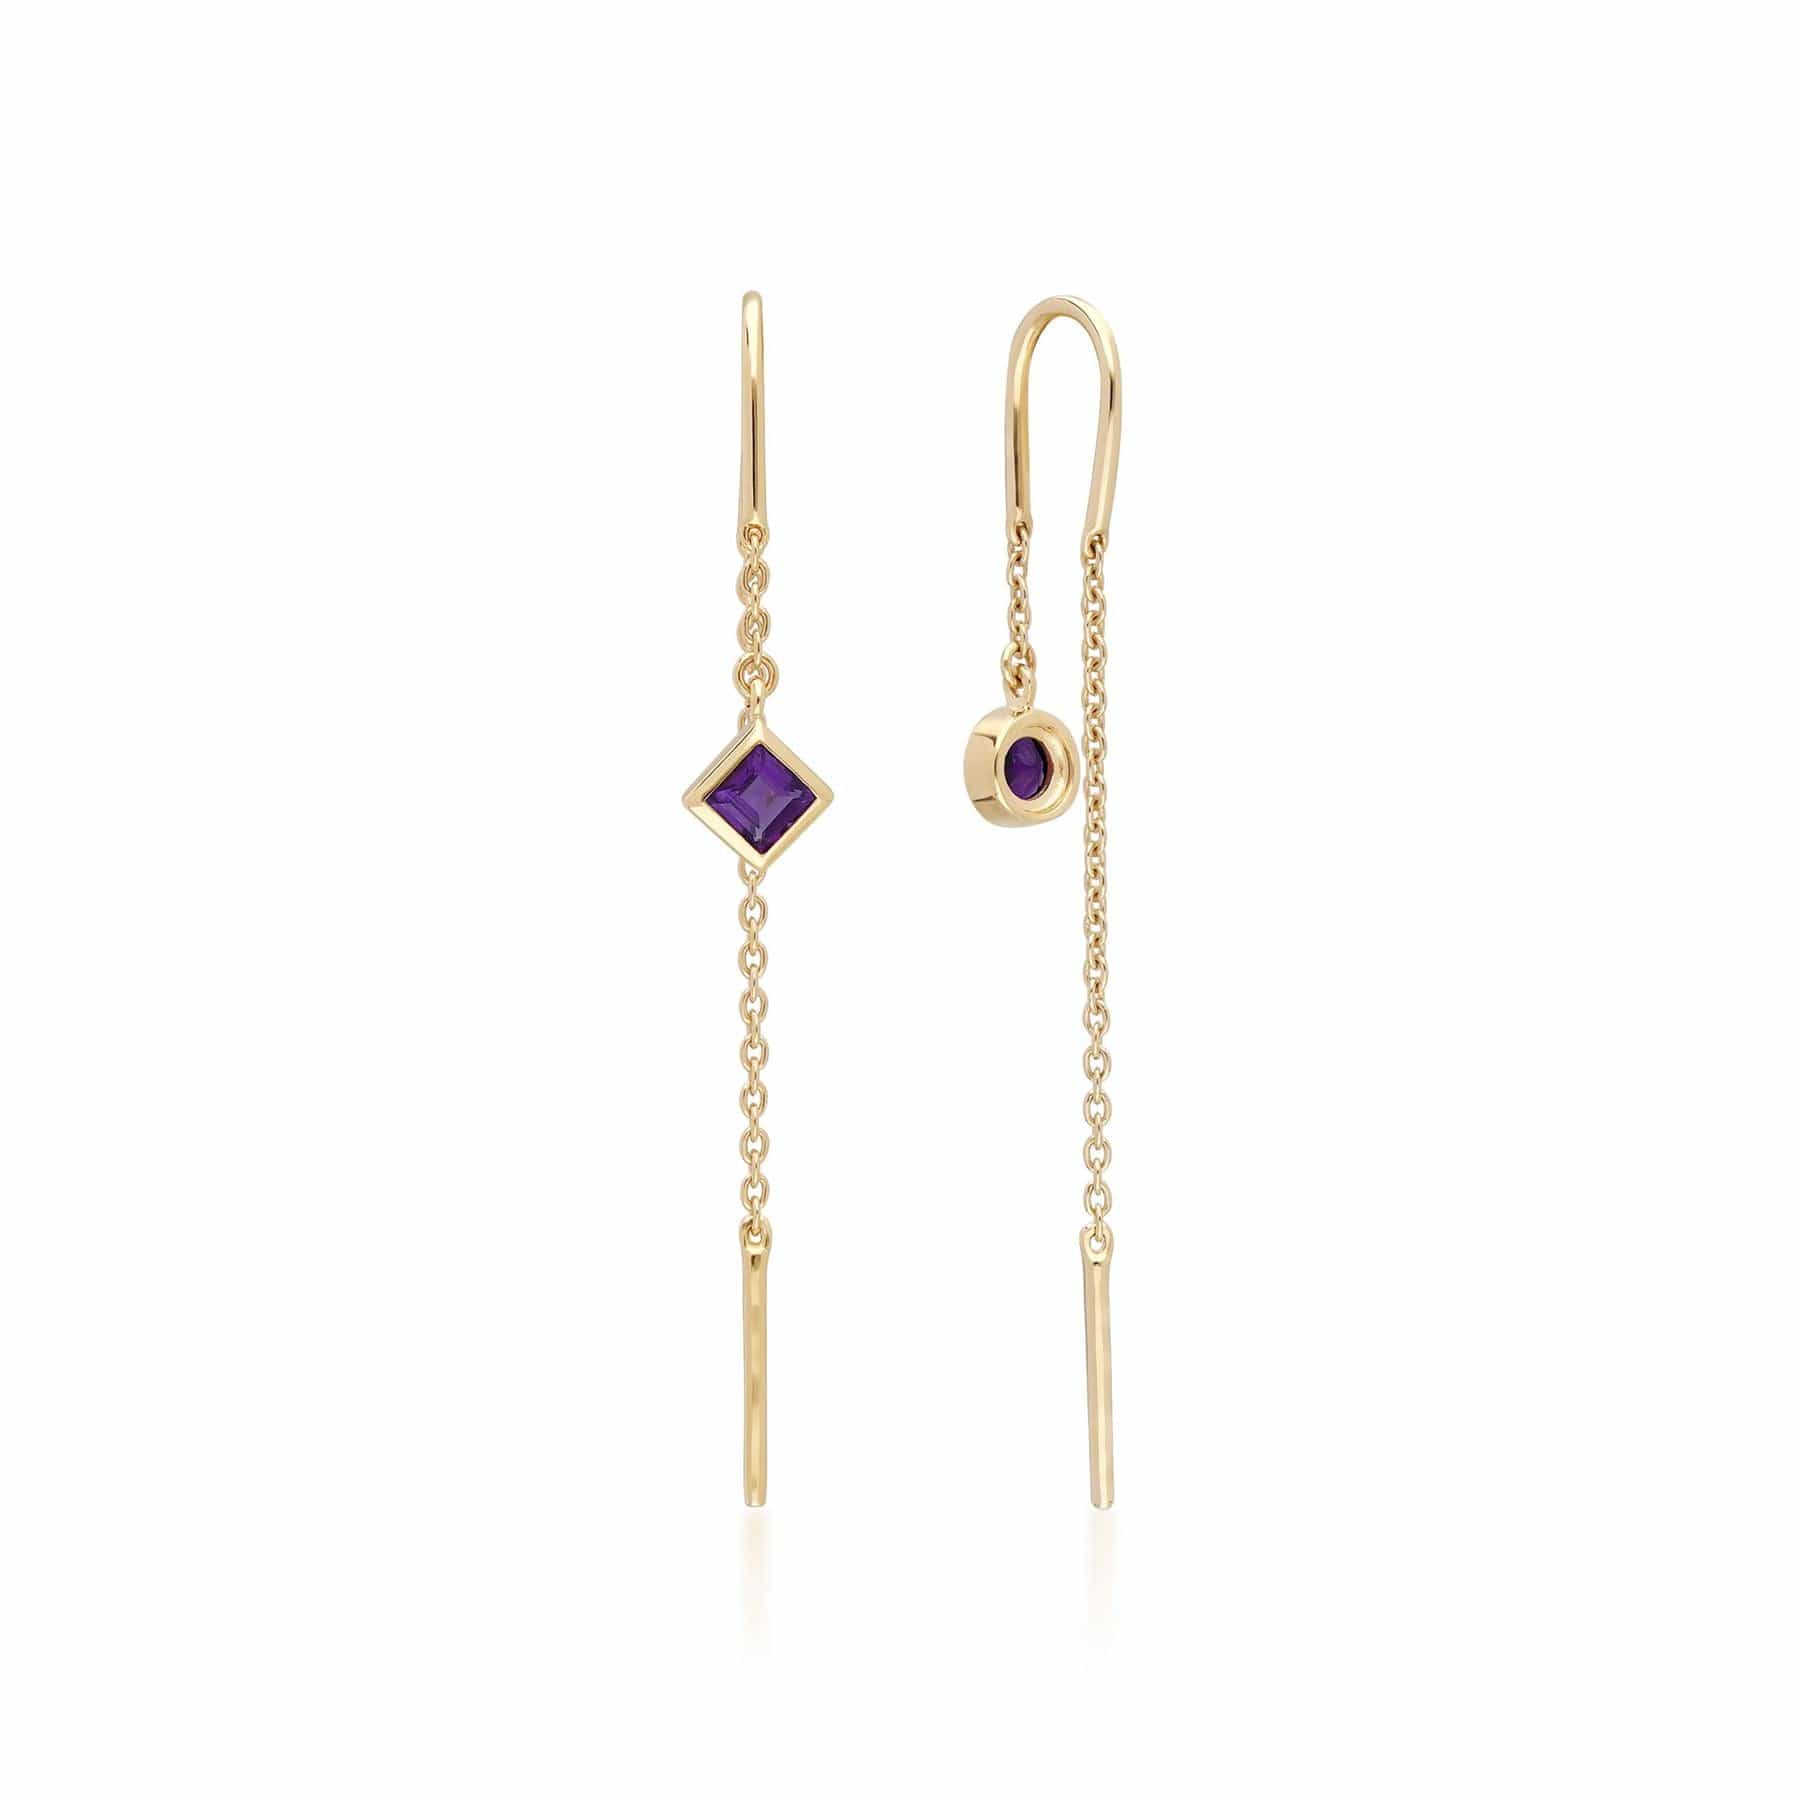 135E1636019 Micro Statement Amethyst Threader Earrings in 9ct Yellow Gold 5